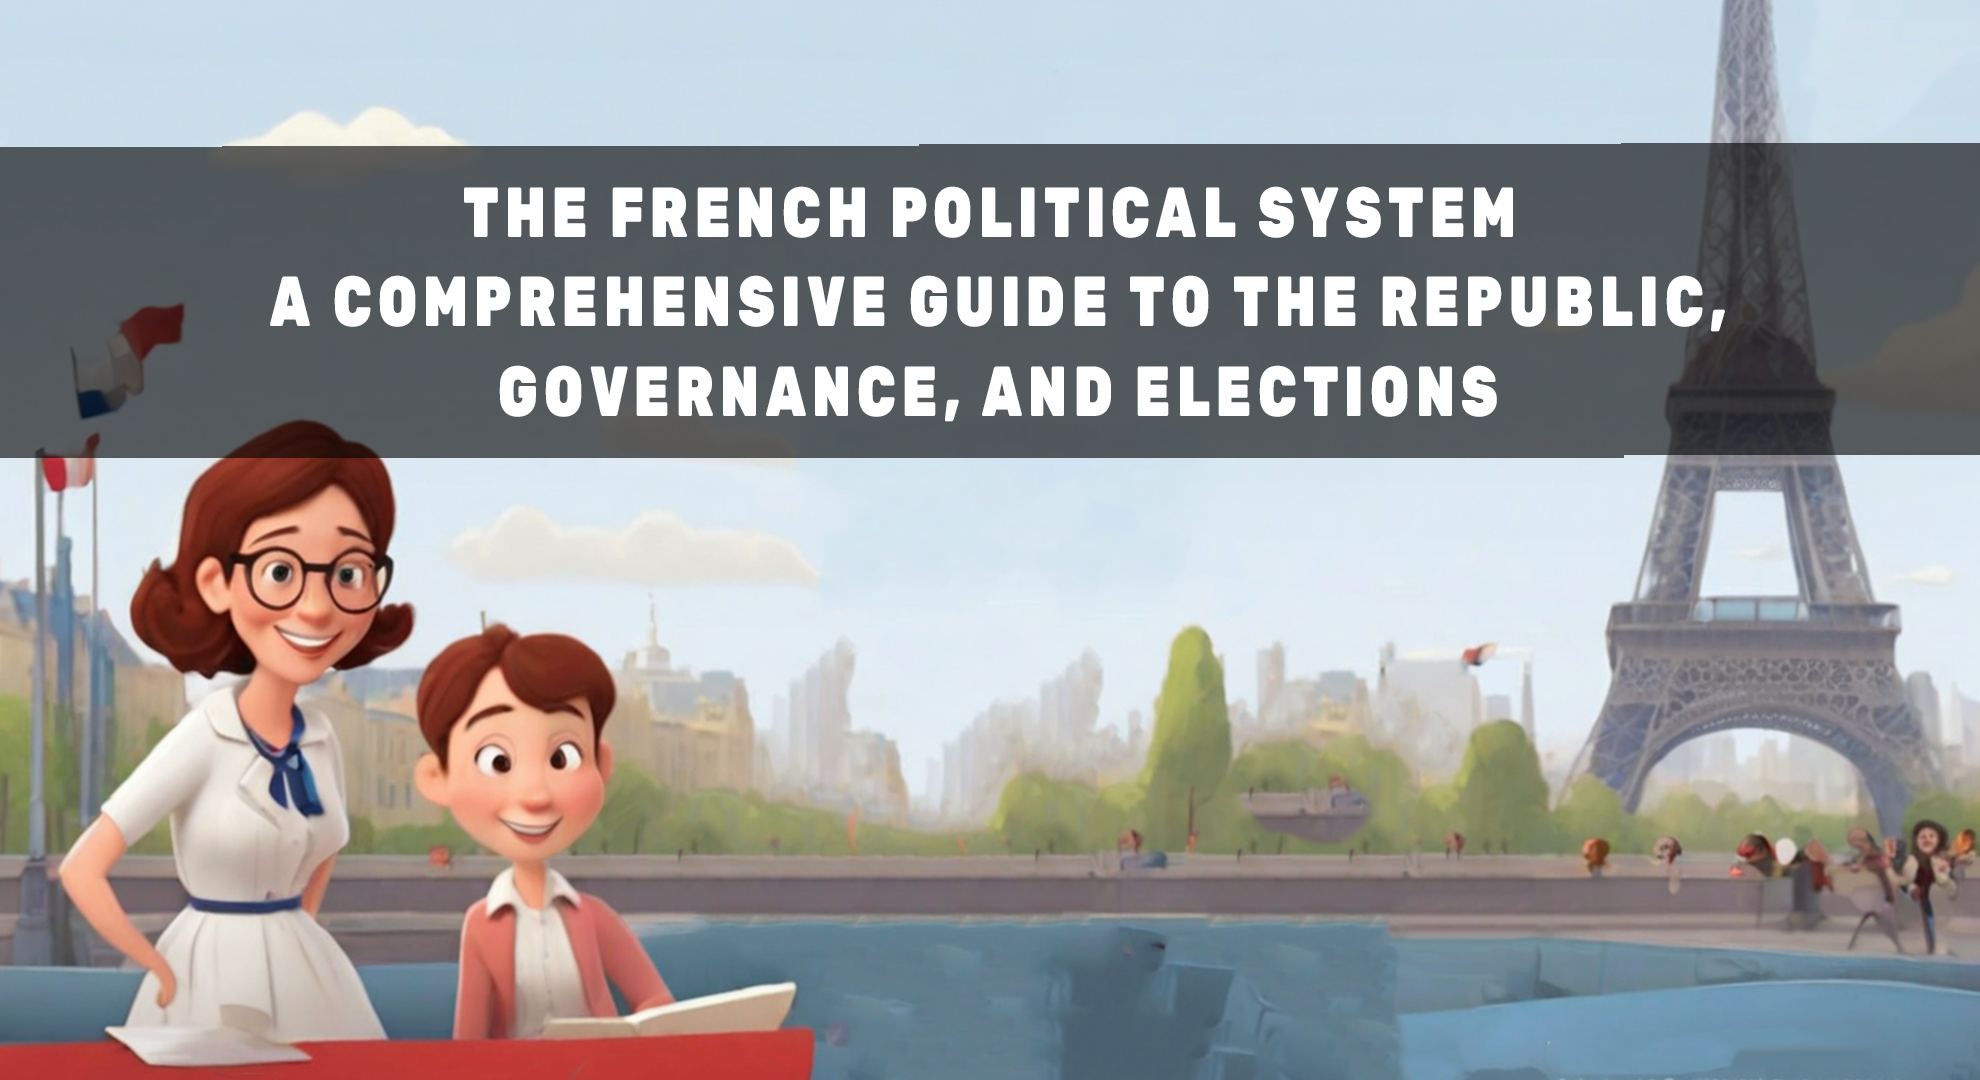 The French Political System A Comprehensive Guide to the Republic, Governance, and Elections